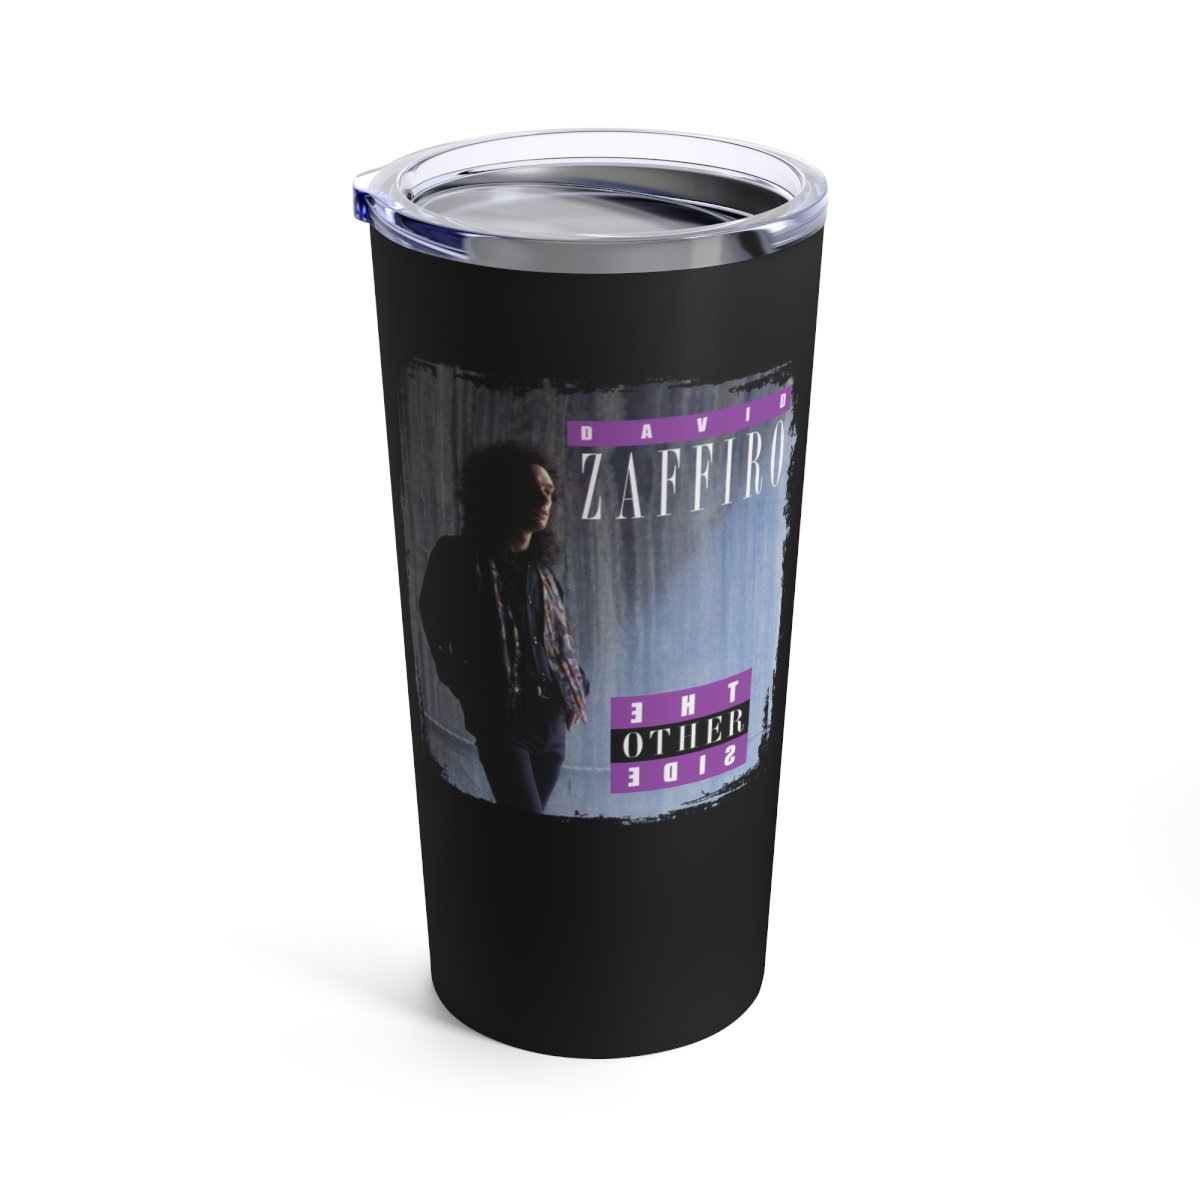 David Zaffiro – The Other Side 20oz Stainless Steel Tumbler